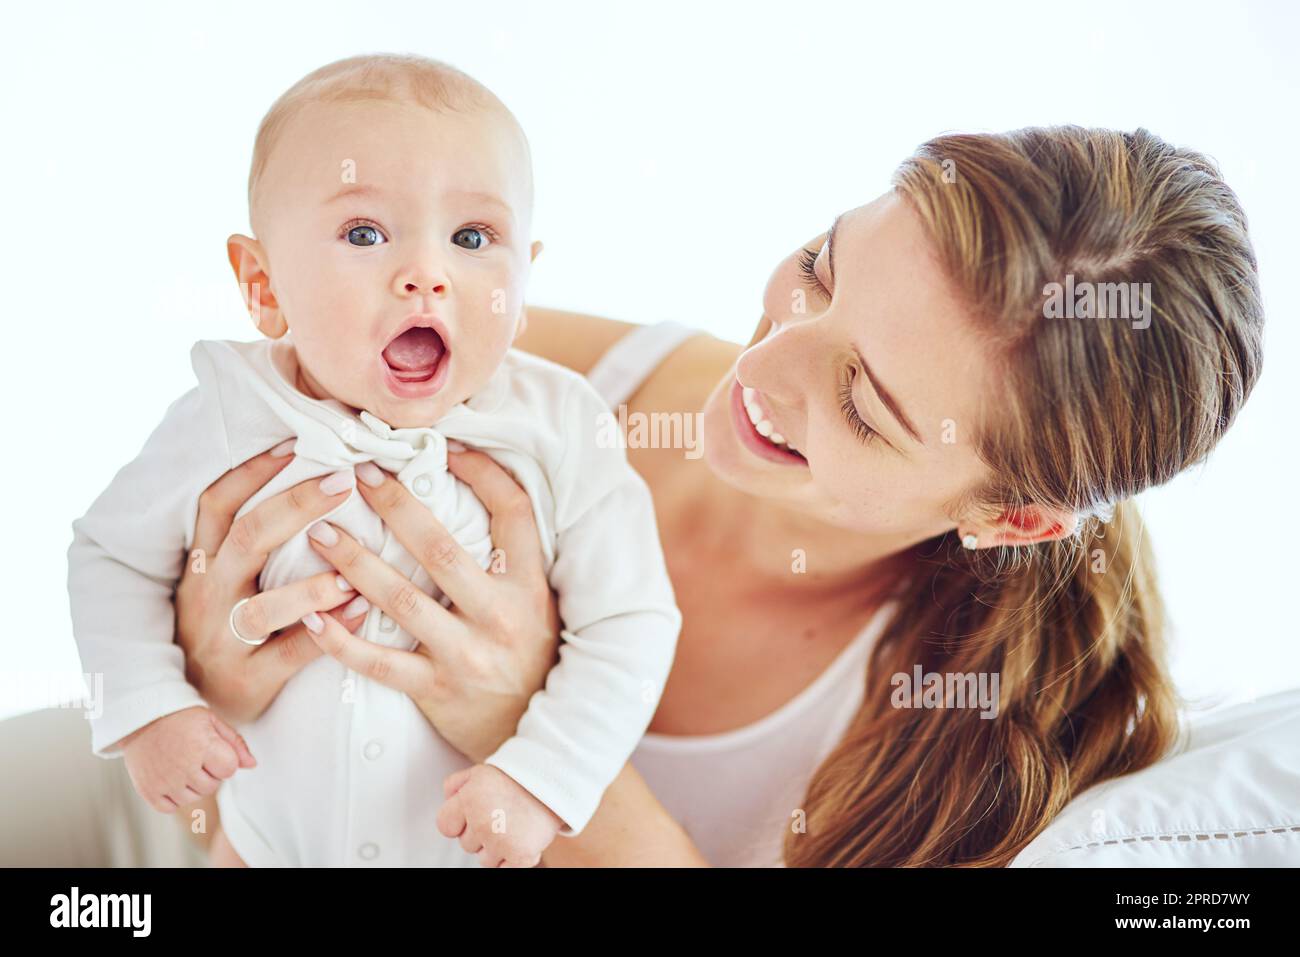 Happy, young and single mother bonding and taking care of adorable baby, enjoying parenthood and being a new mom. Happy female experiencing maternal instinct, holding cute, little child on a bed. Stock Photo